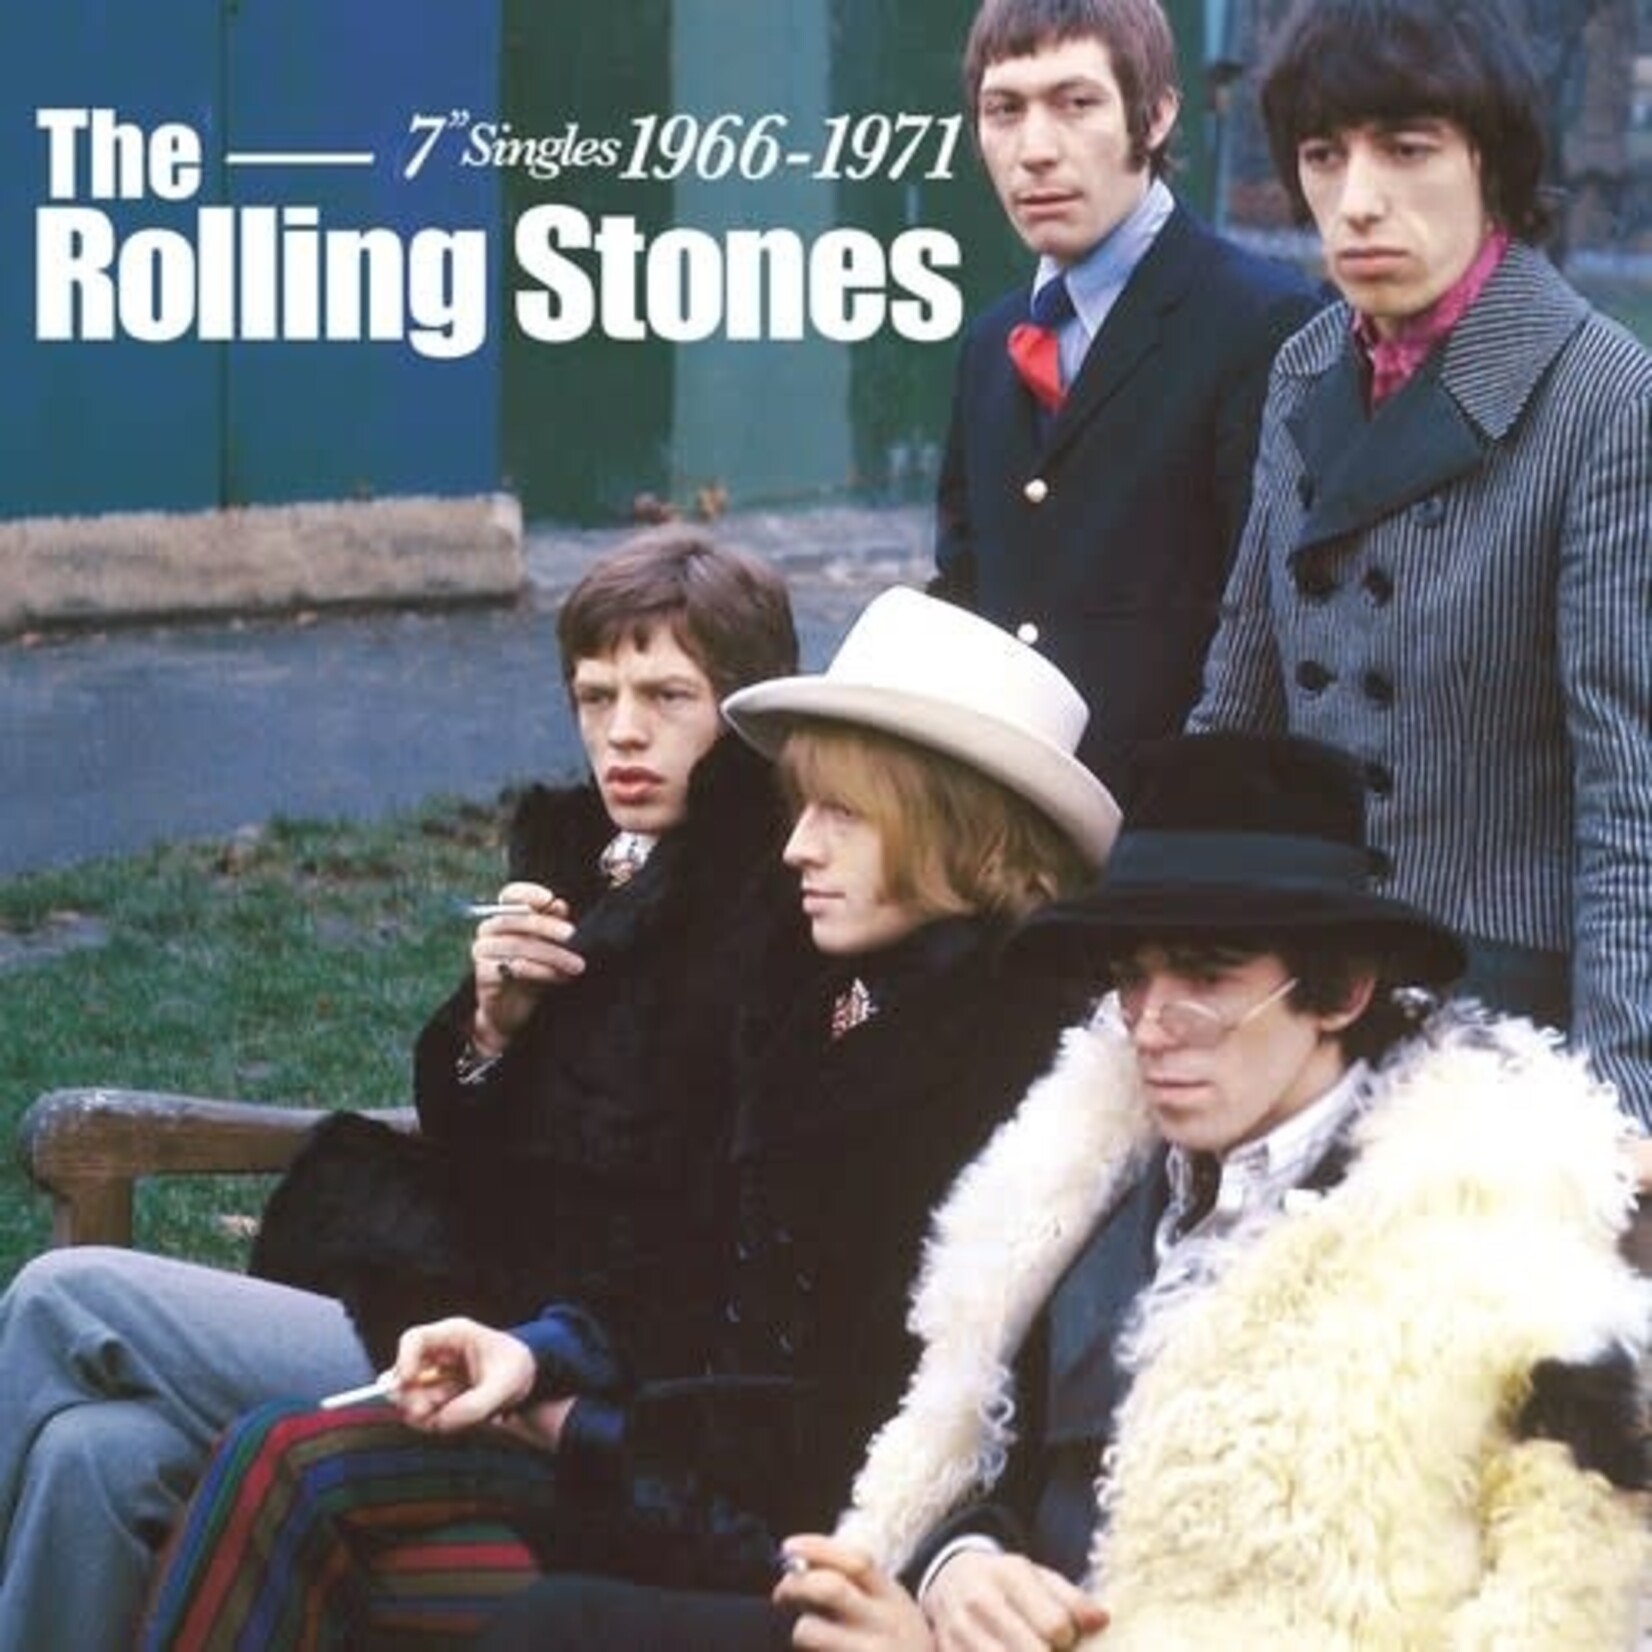 [New] ROLLING STONES,THE(7"SGL): Rolling Stones,The [7", ABKCO]